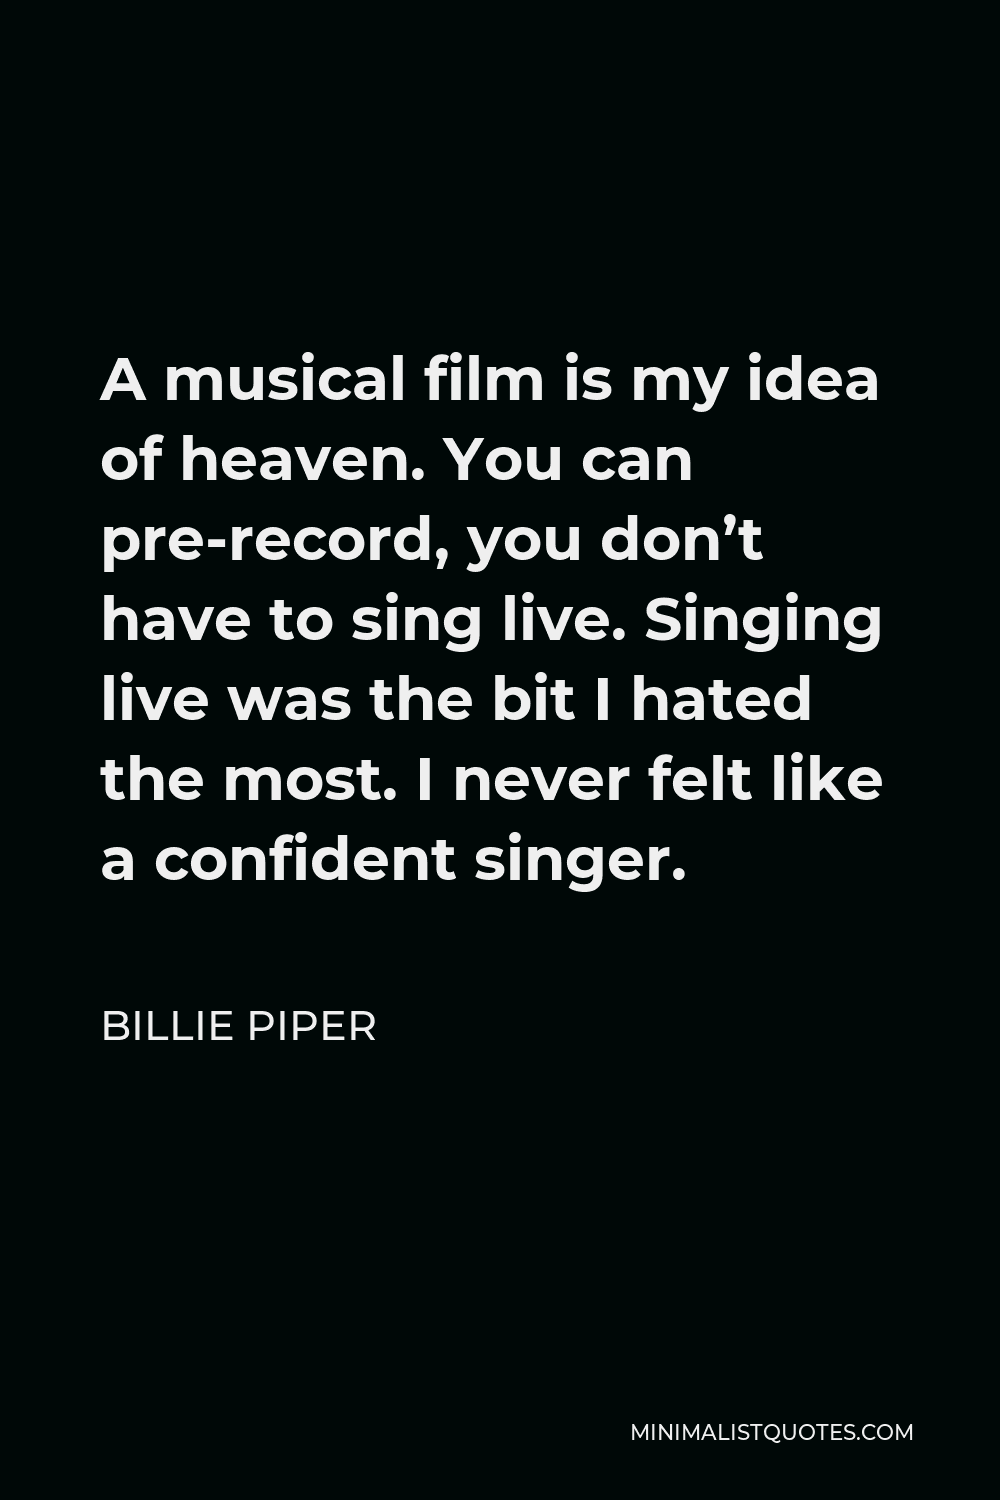 Billie Piper Quote - A musical film is my idea of heaven. You can pre-record, you don’t have to sing live. Singing live was the bit I hated the most. I never felt like a confident singer.